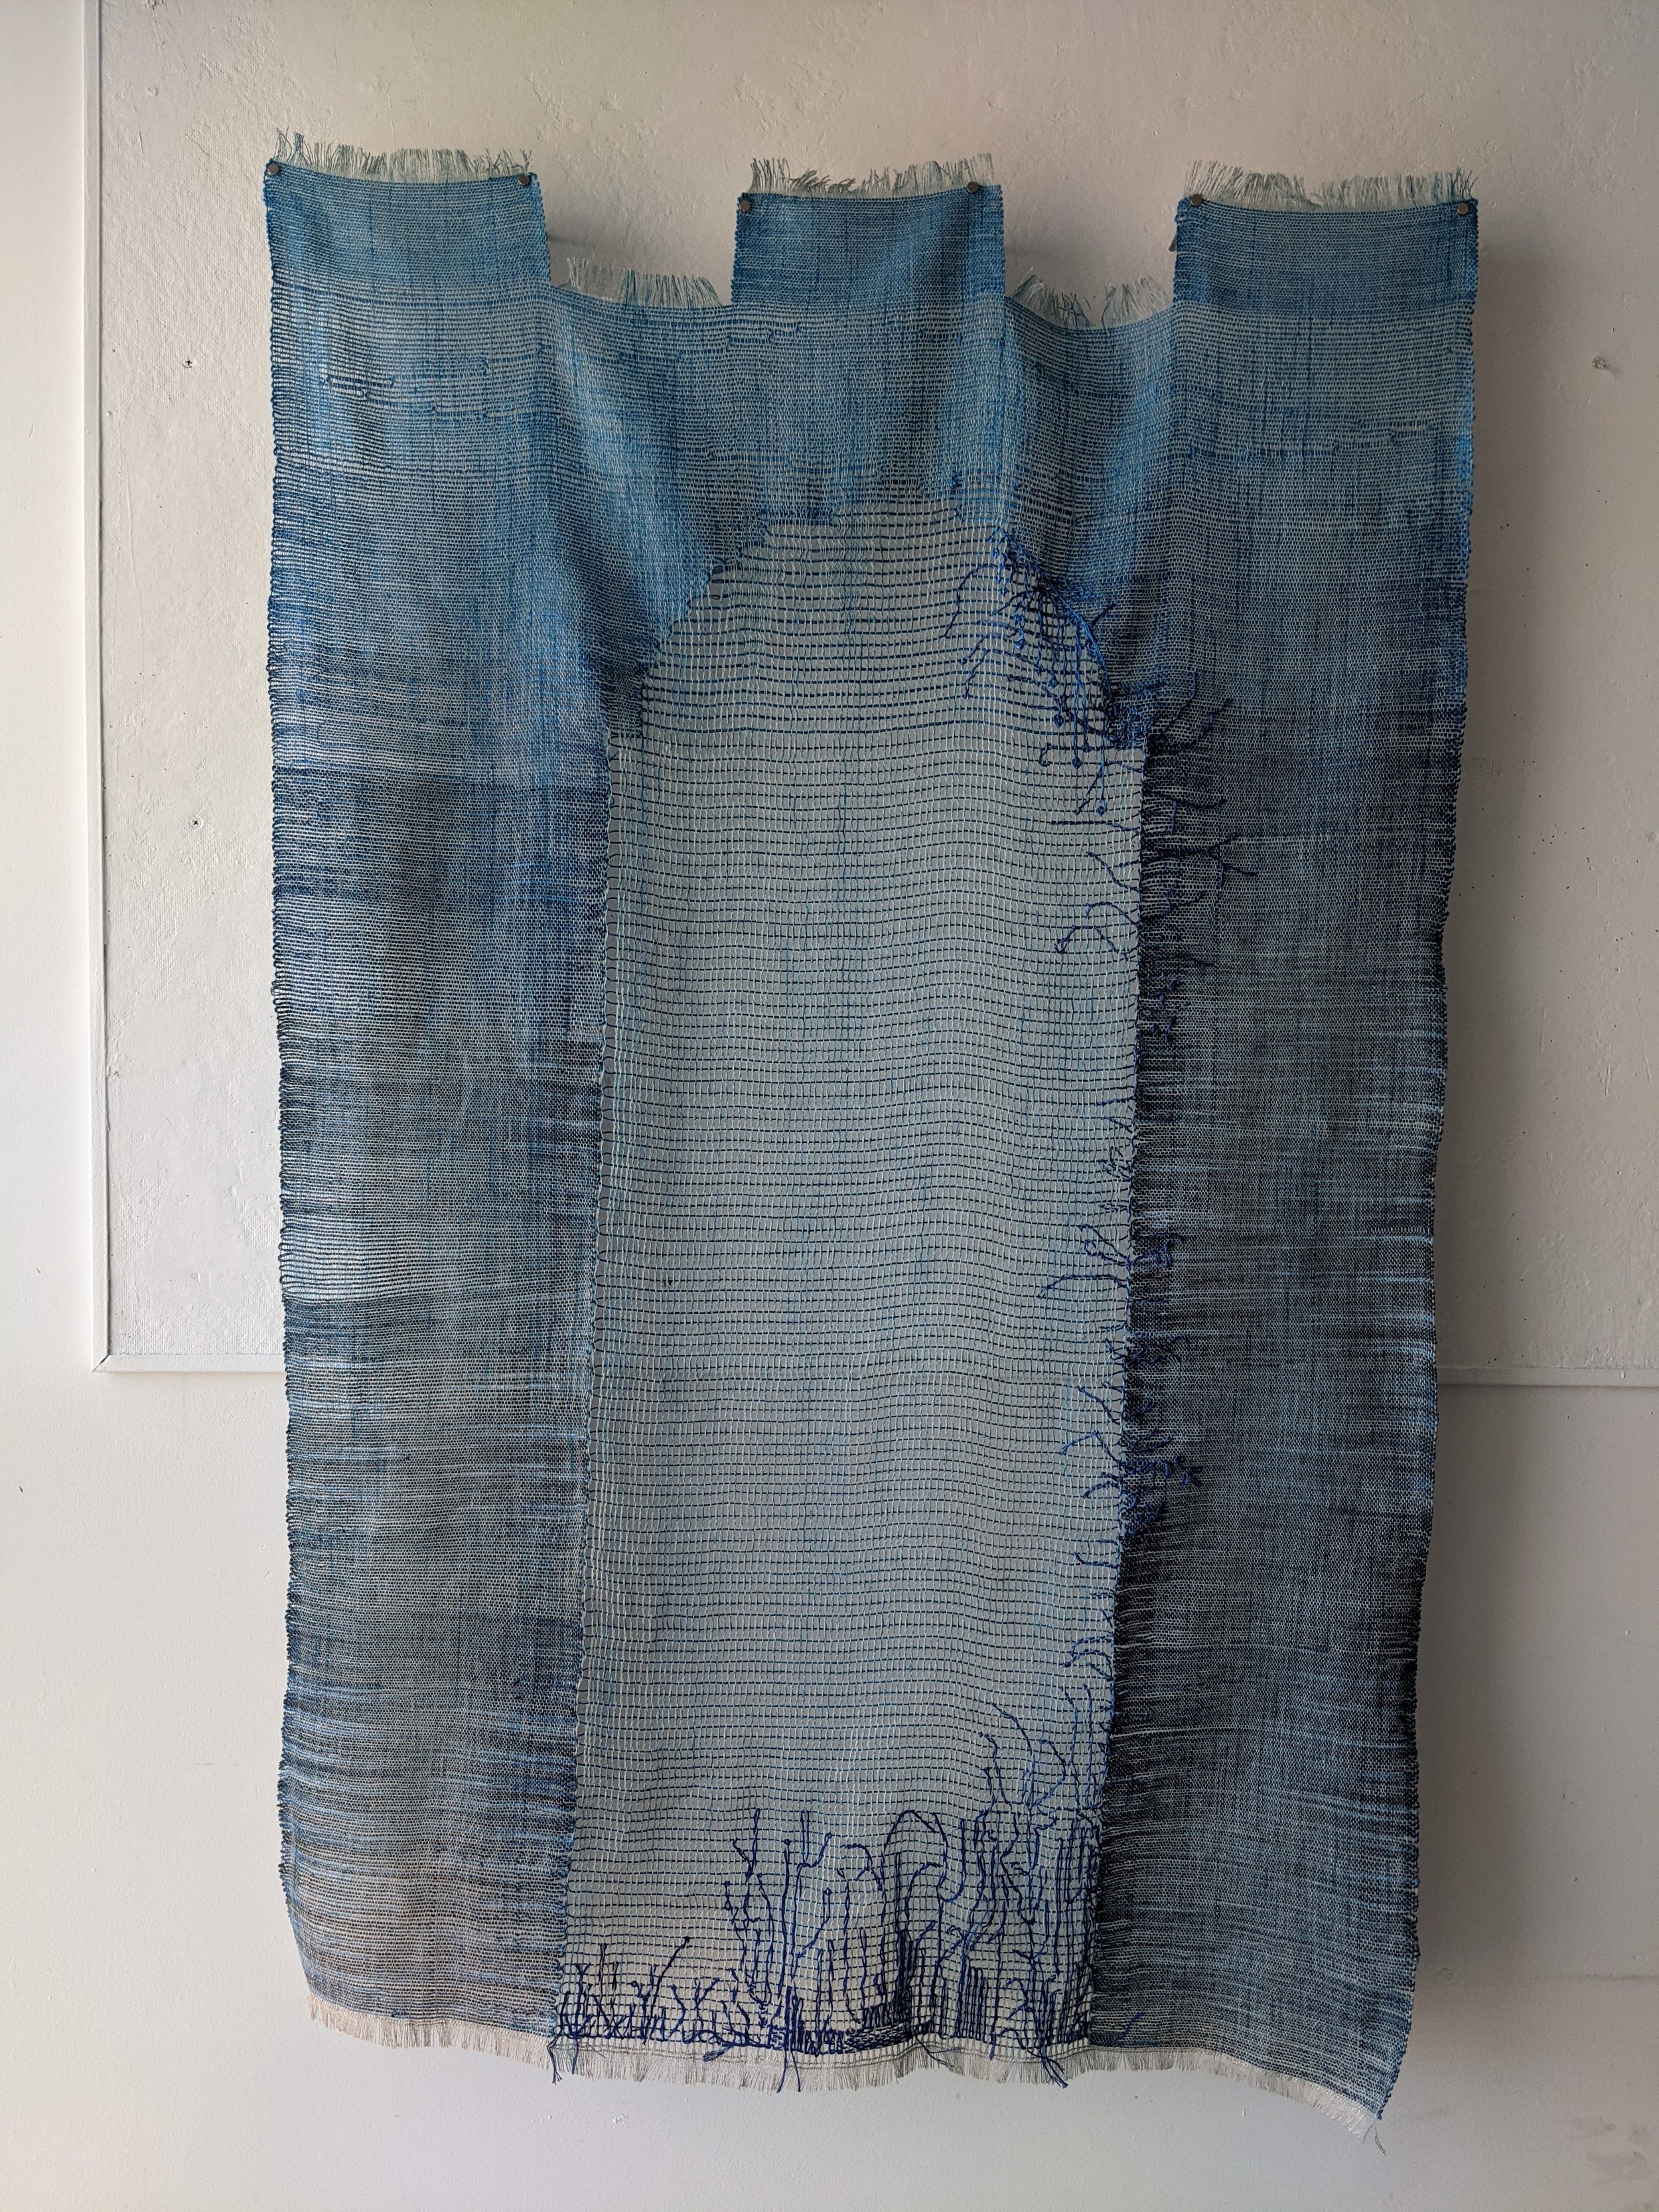  blue tower hand woven gauze; painted linen, cotton, and silk. 54 in x 34 in 2021 